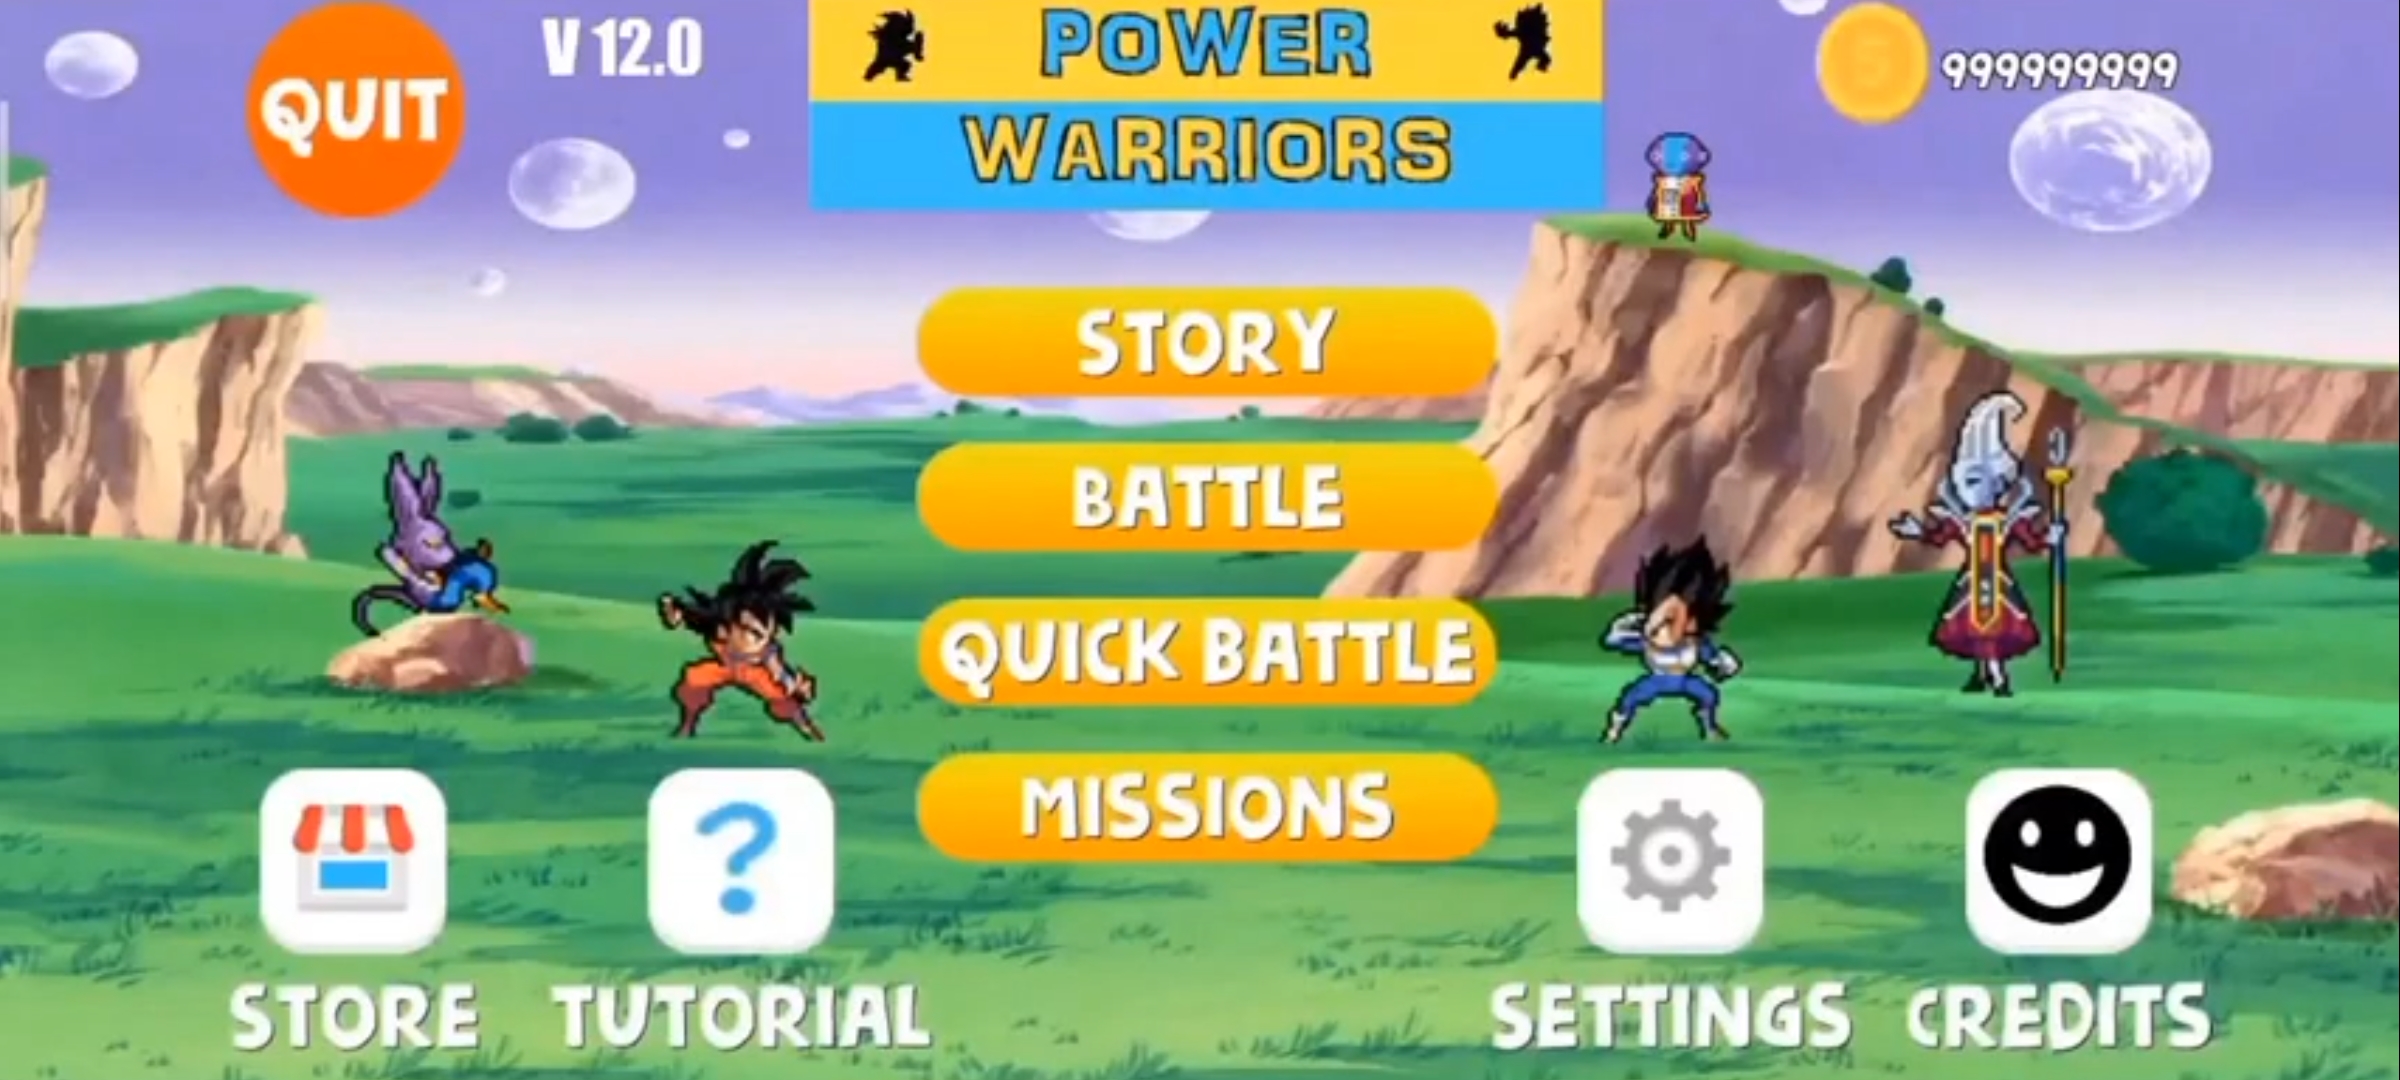 Power Warriors 12 0 Apk Download Mediafire Link Android4game